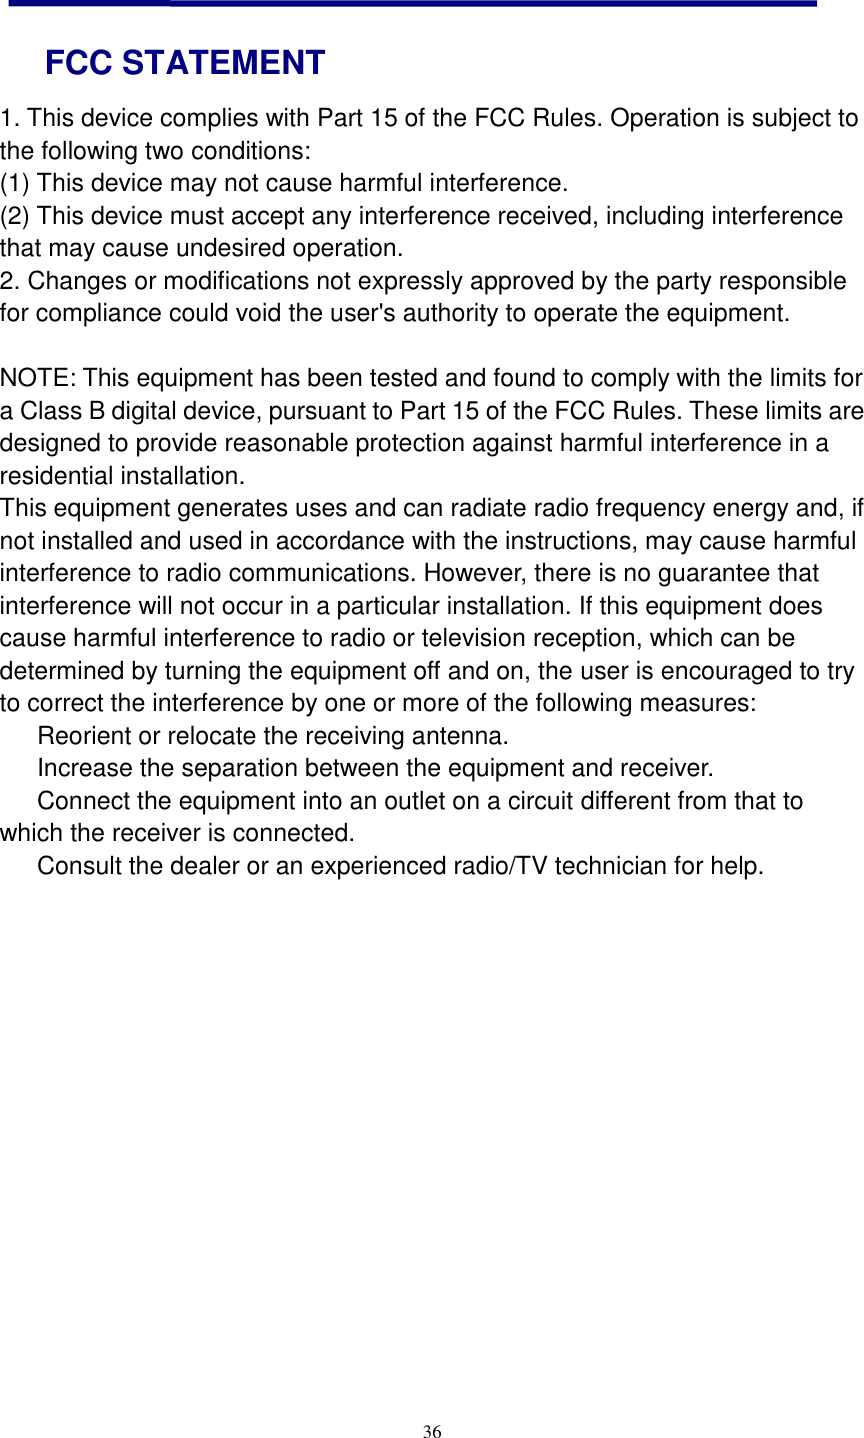  36   FCC STATEMENT 1. This device complies with Part 15 of the FCC Rules. Operation is subject to the following two conditions: (1) This device may not cause harmful interference. (2) This device must accept any interference received, including interference that may cause undesired operation. 2. Changes or modifications not expressly approved by the party responsible for compliance could void the user&apos;s authority to operate the equipment.  NOTE: This equipment has been tested and found to comply with the limits for a Class B digital device, pursuant to Part 15 of the FCC Rules. These limits are designed to provide reasonable protection against harmful interference in a residential installation. This equipment generates uses and can radiate radio frequency energy and, if not installed and used in accordance with the instructions, may cause harmful interference to radio communications. However, there is no guarantee that interference will not occur in a particular installation. If this equipment does cause harmful interference to radio or television reception, which can be determined by turning the equipment off and on, the user is encouraged to try to correct the interference by one or more of the following measures:   Reorient or relocate the receiving antenna.   Increase the separation between the equipment and receiver.   Connect the equipment into an outlet on a circuit different from that to which the receiver is connected.   Consult the dealer or an experienced radio/TV technician for help.    